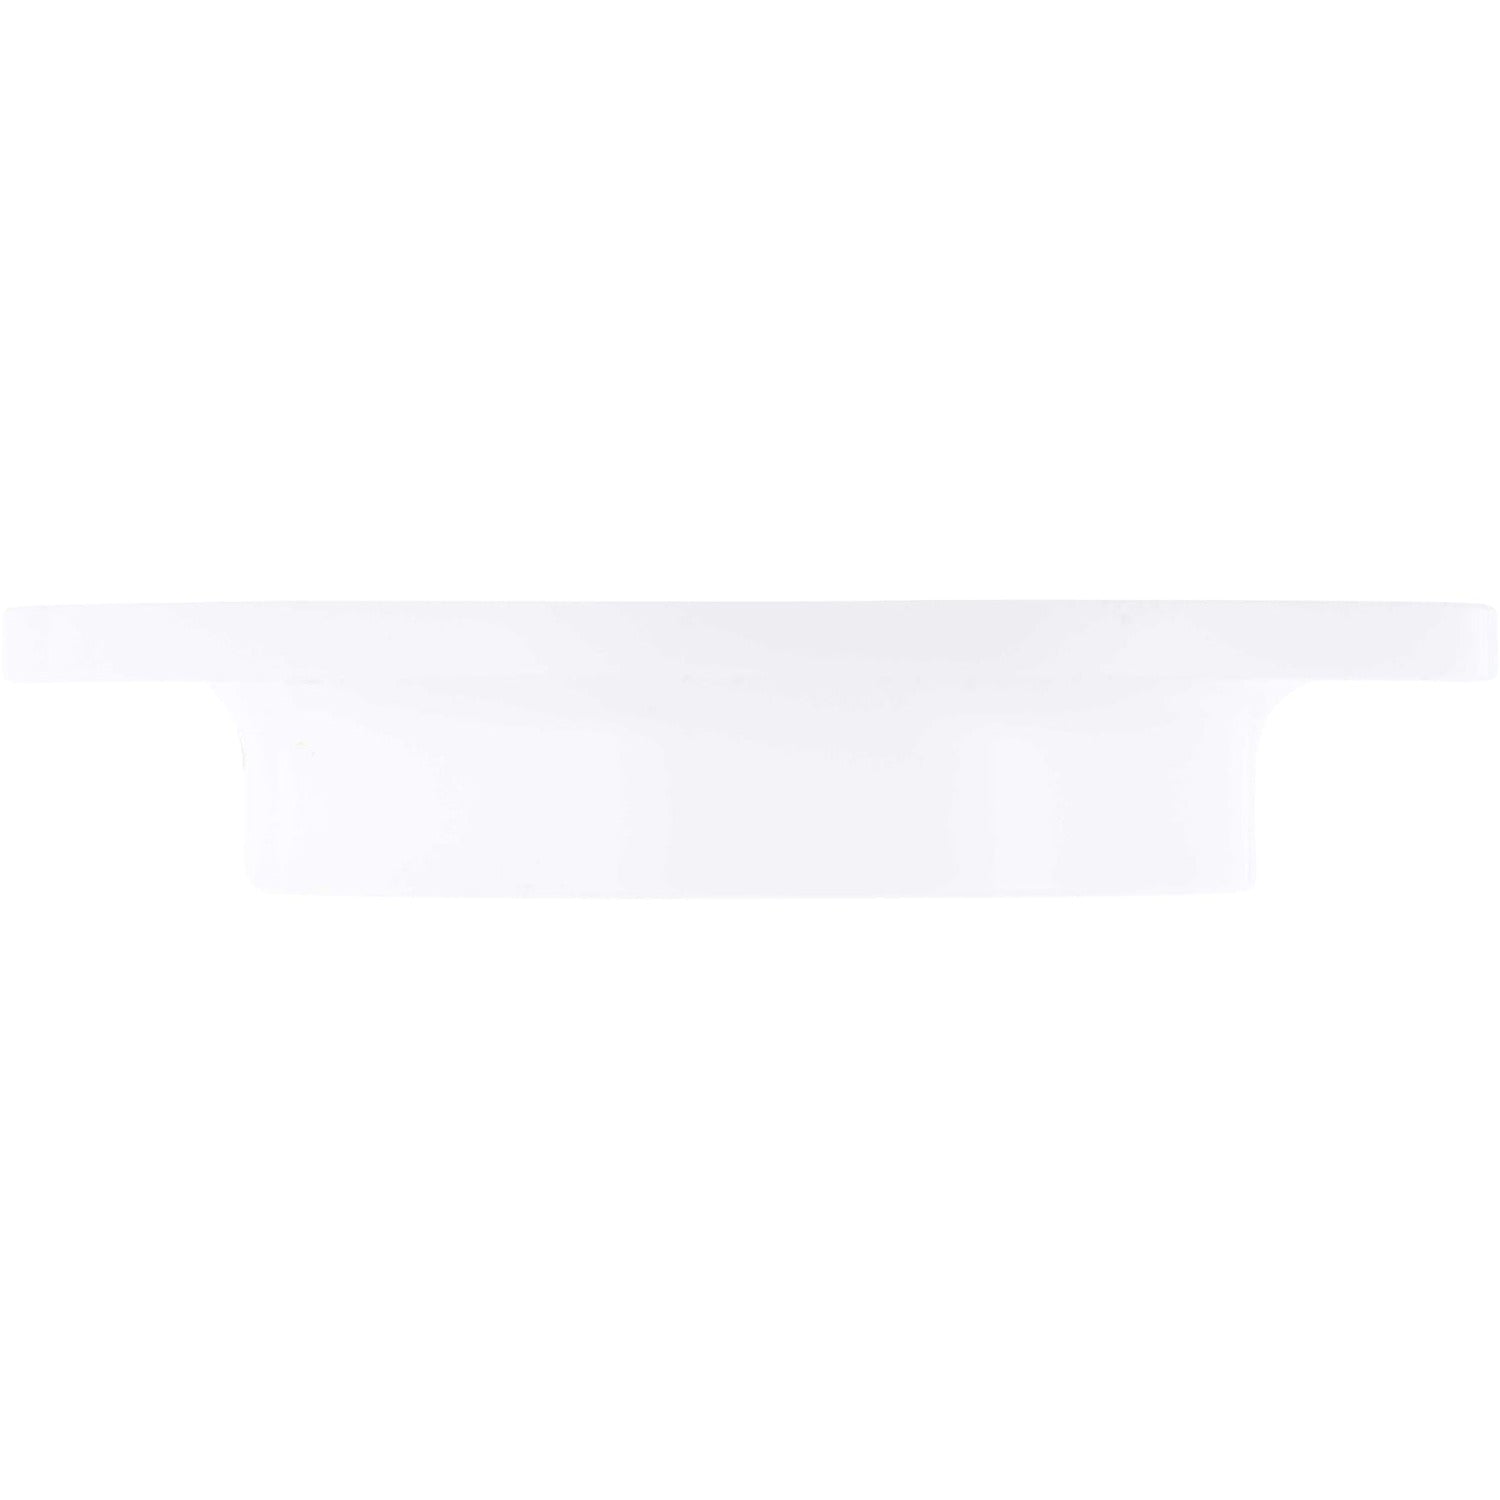 Circular white plastic part with a wide upper diameter that tapers down to a smaller diameter on the bottom side of part. Part shown on white background. 